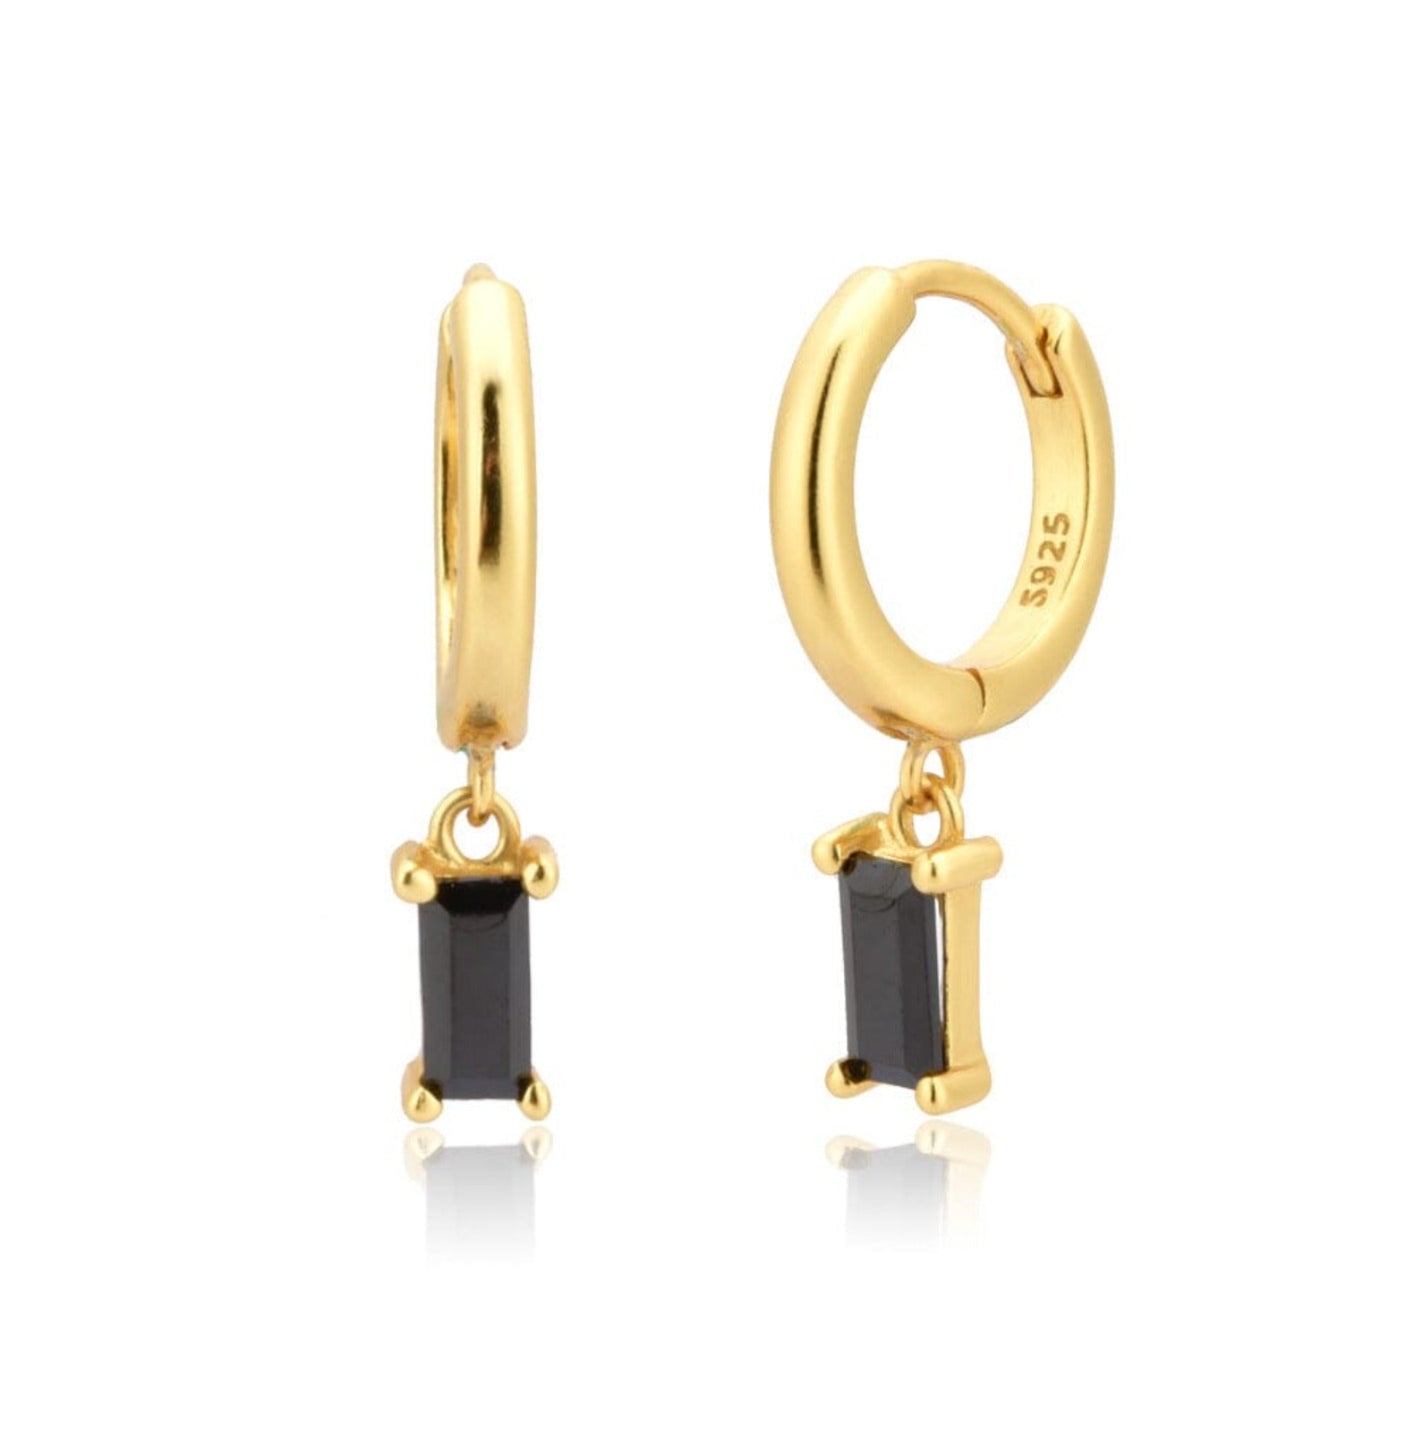 DAINTY EARRINGS earing Yubama Jewelry Online Store - The Elegant Designs of Gold and Silver ! Black 